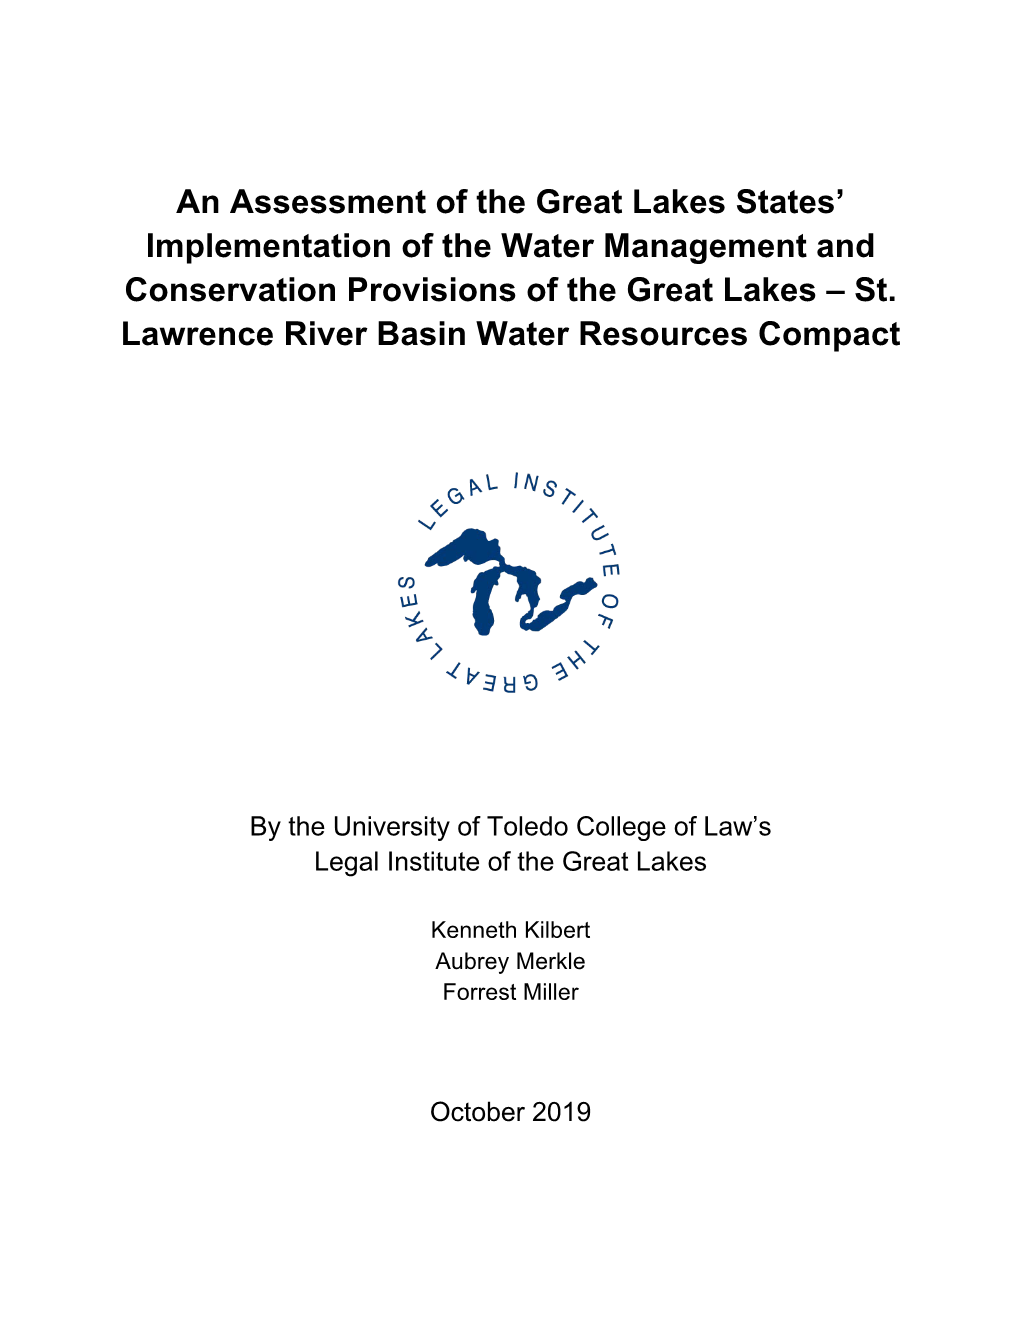 An Assessment of the Great Lakes States’ Implementation of the Water Management and Conservation Provisions of the Great Lakes – St